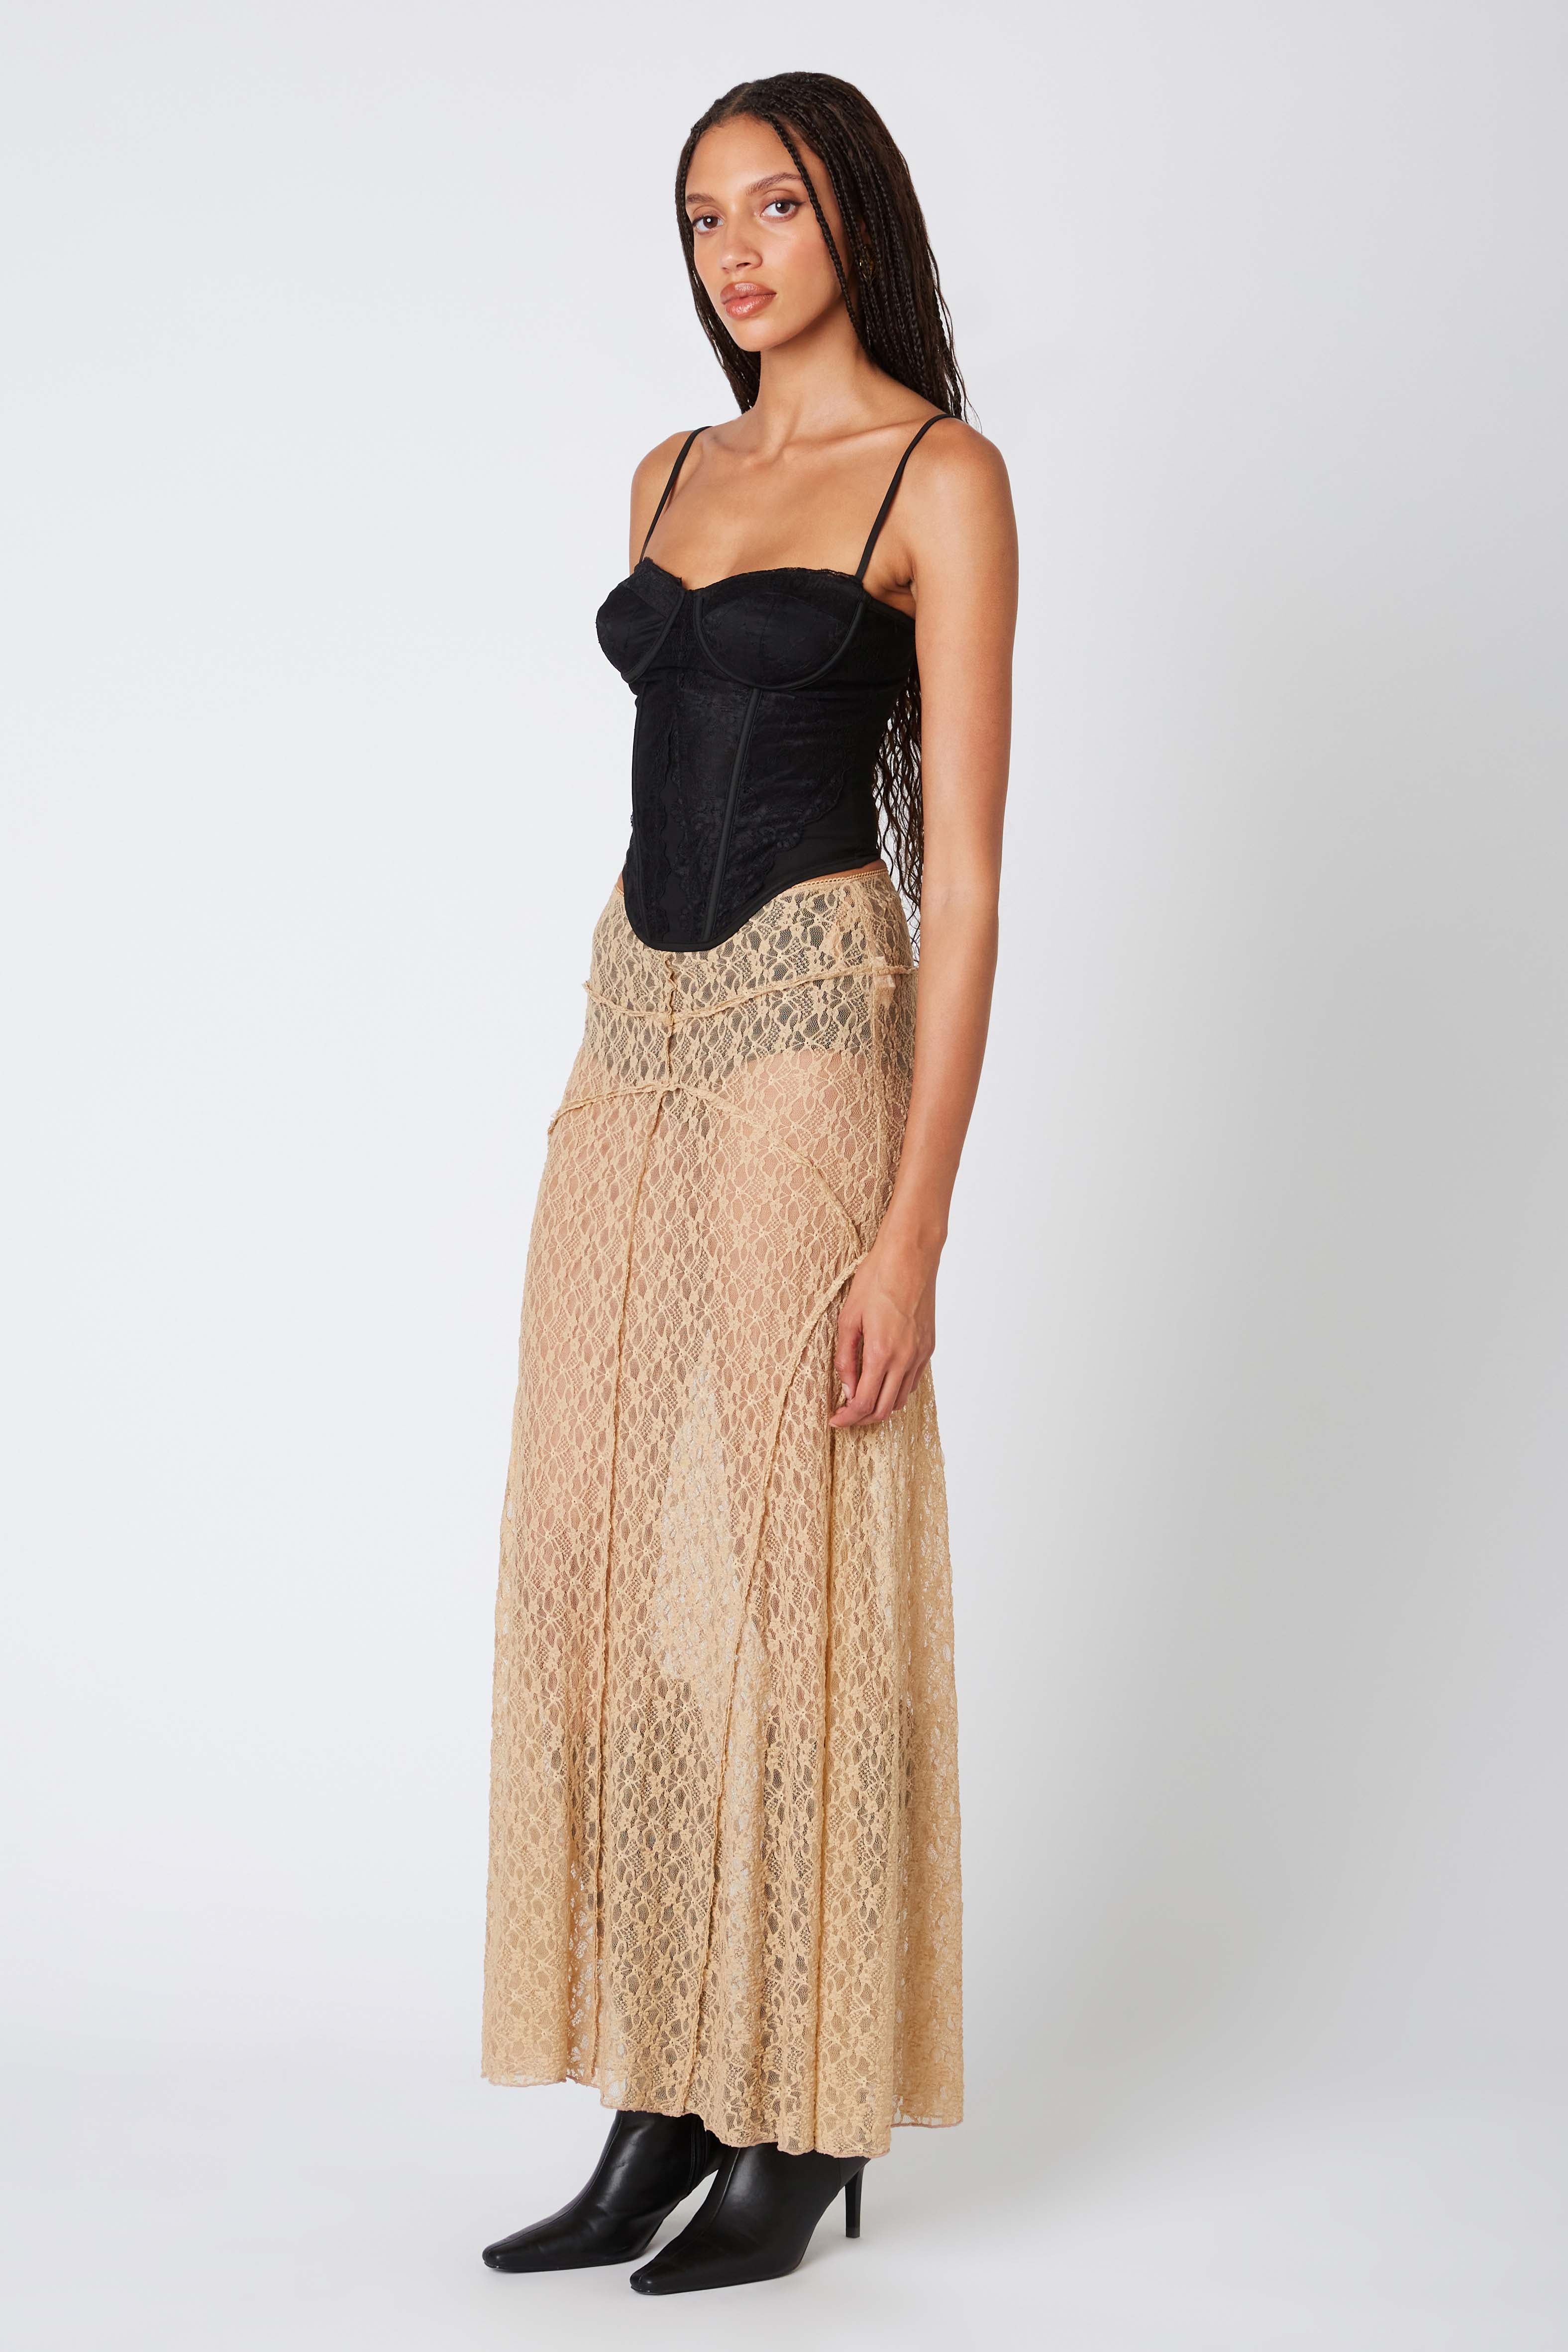 Sheer Lace Maxi Skirt in Tan Side View